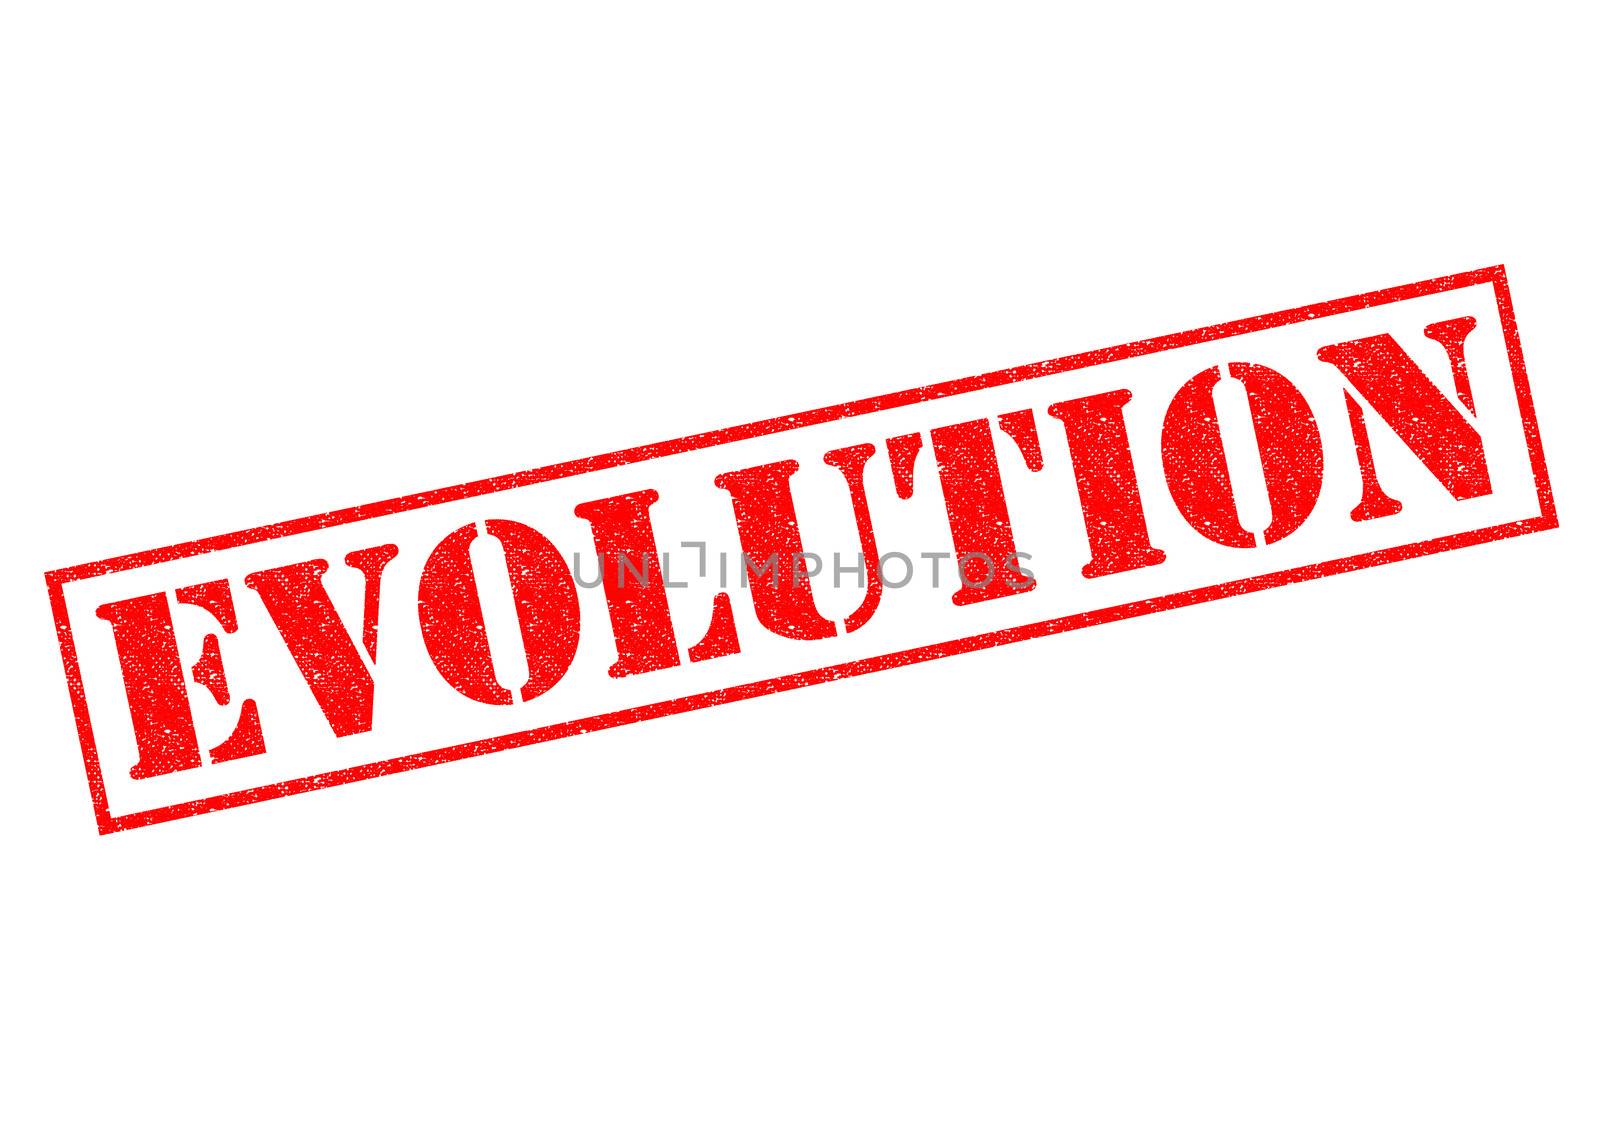 EVOLUTION red Rubber Stamp over a white background.